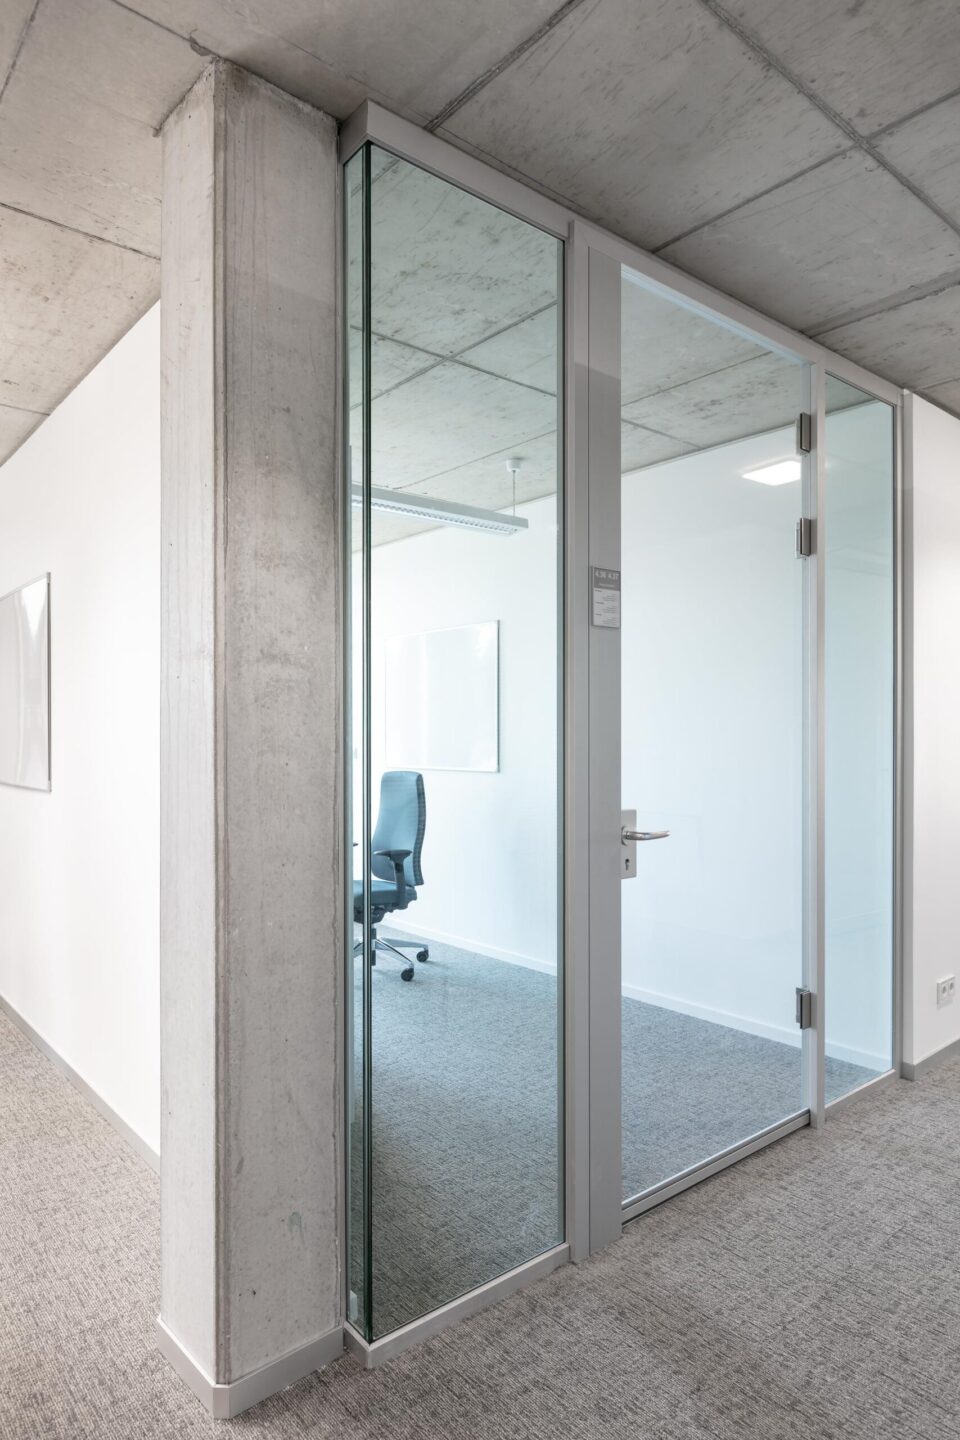 Karlsruhe City Tax Office │ modern workplaces │ all-glass door elements